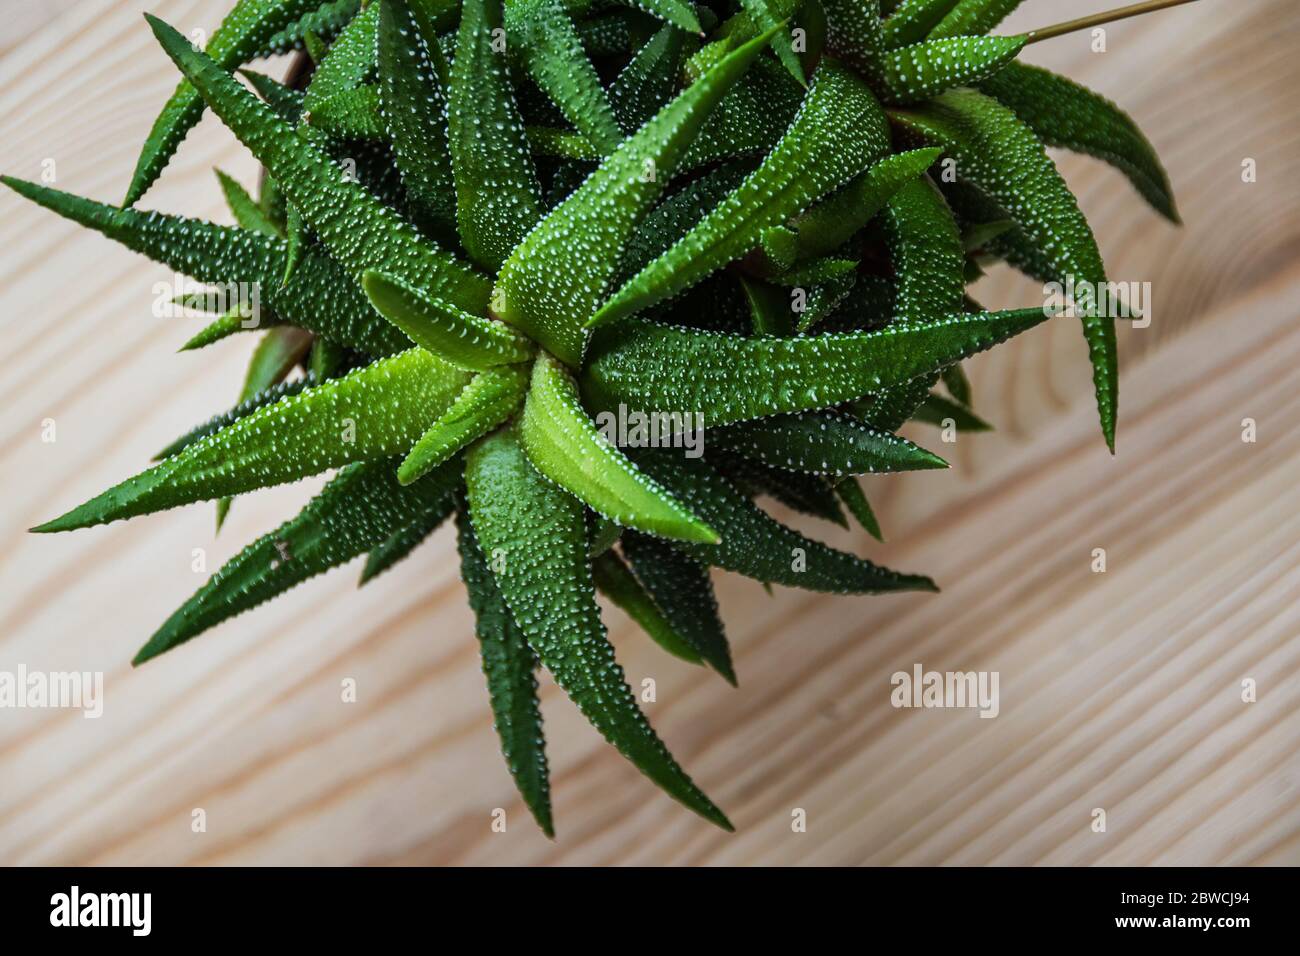 Haworthia Attenuata Succulent Plant On A Light Wooden Table Stock Photo Alamy,Dog Ear Mites Vs Infection